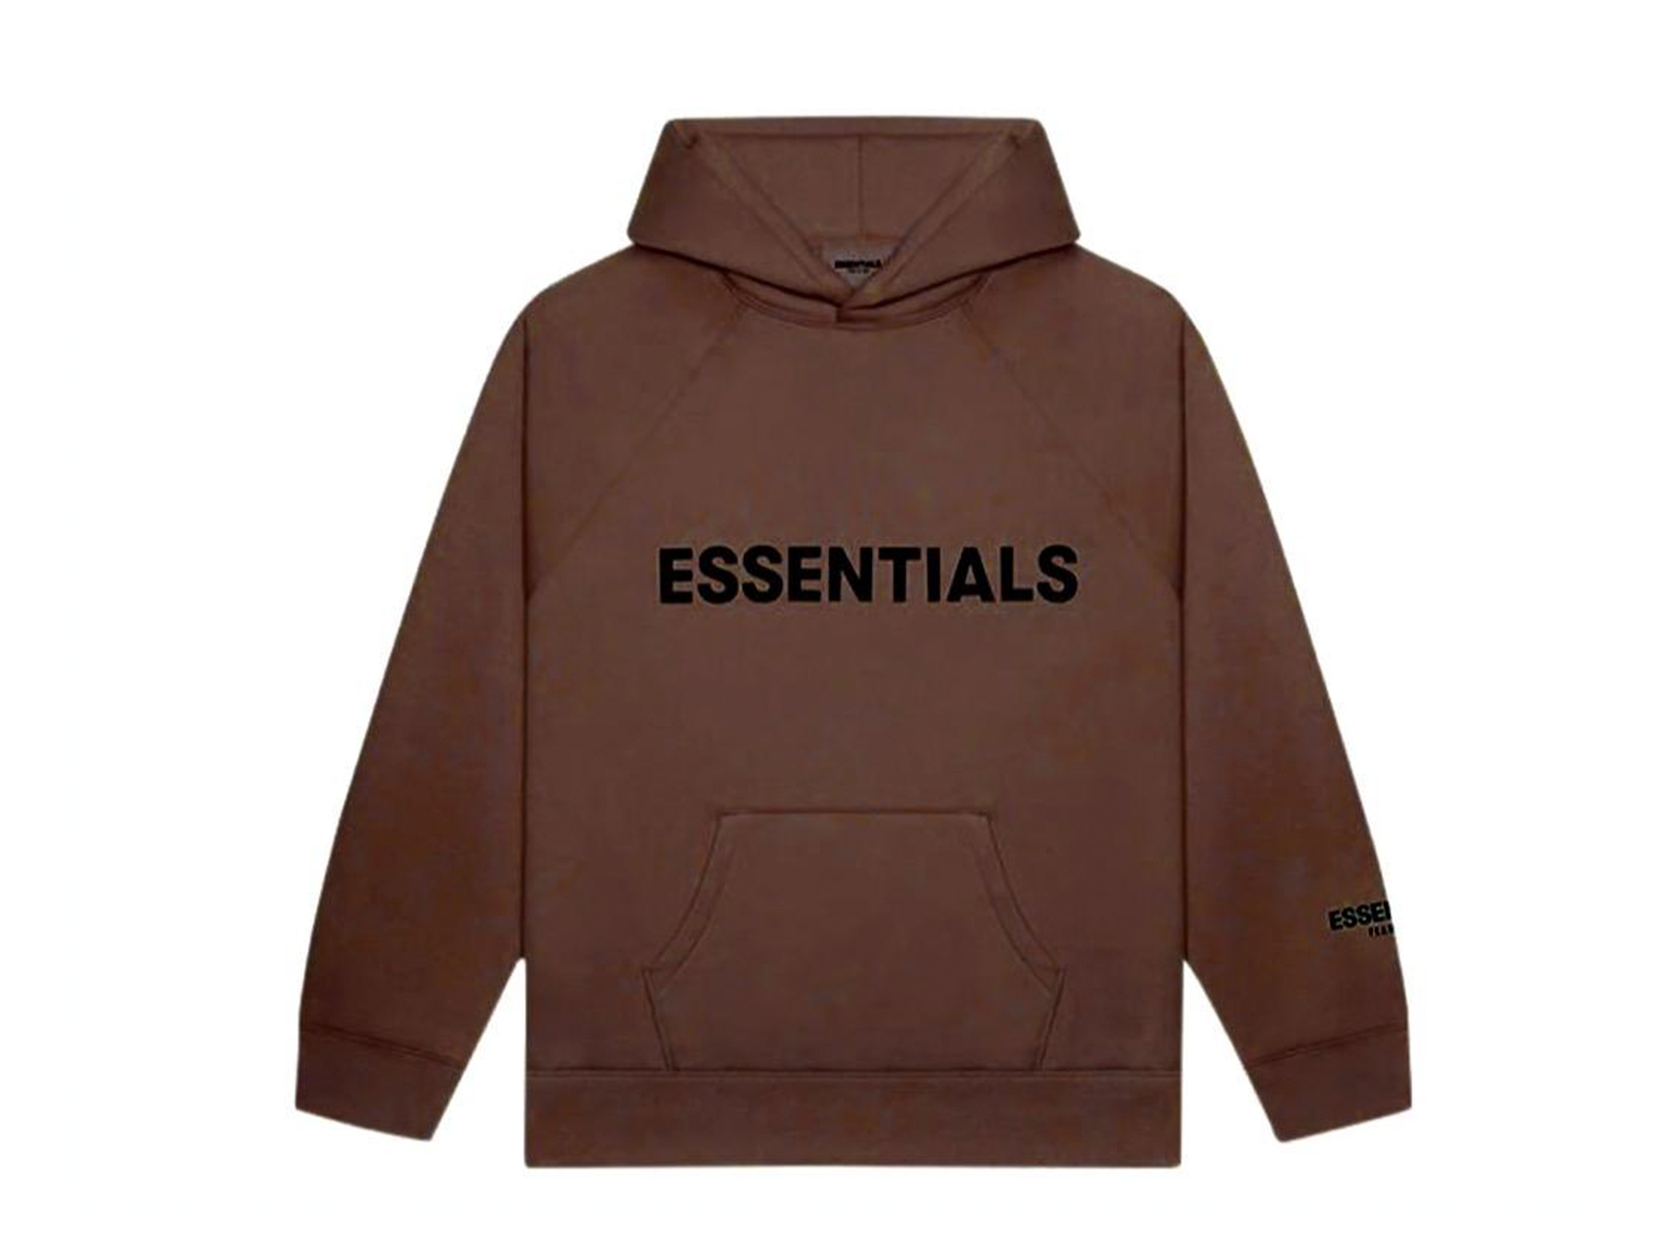 Double Boxed hoodie 349.99 FEAR OF GOD ESSENTIALS PULLOVER HOODIE RAIN DRUM BROWN Double Boxed